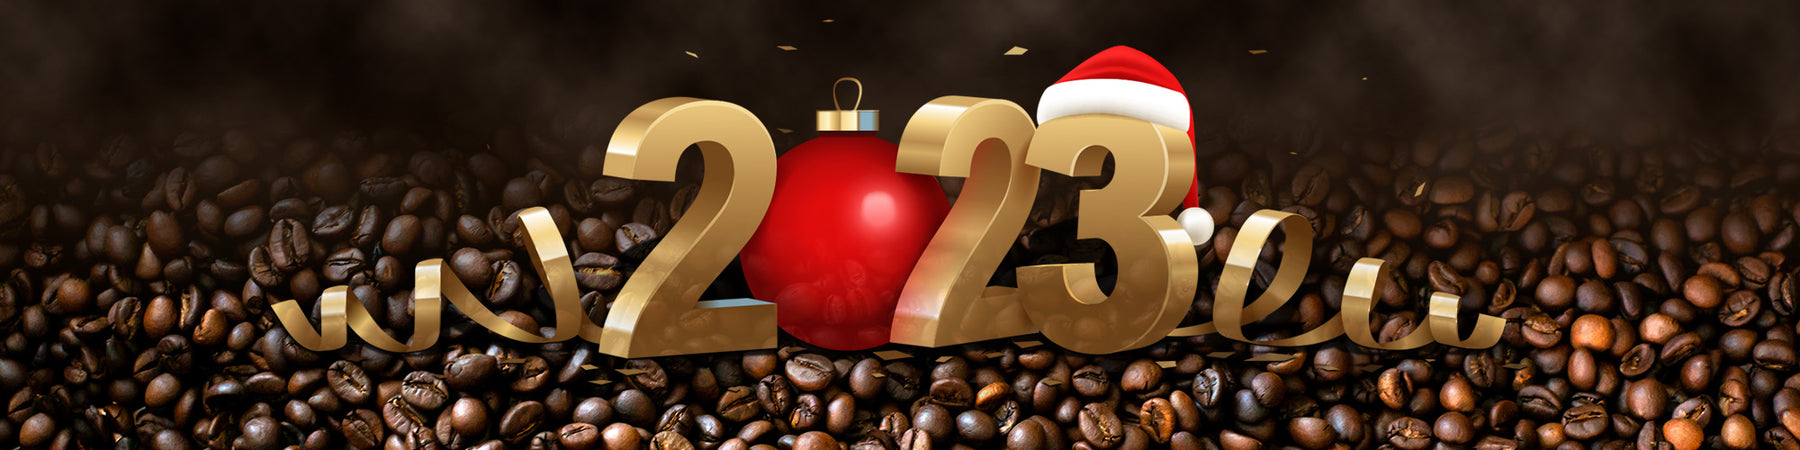 2023 New Year's Resolutions for Coffee Lovers